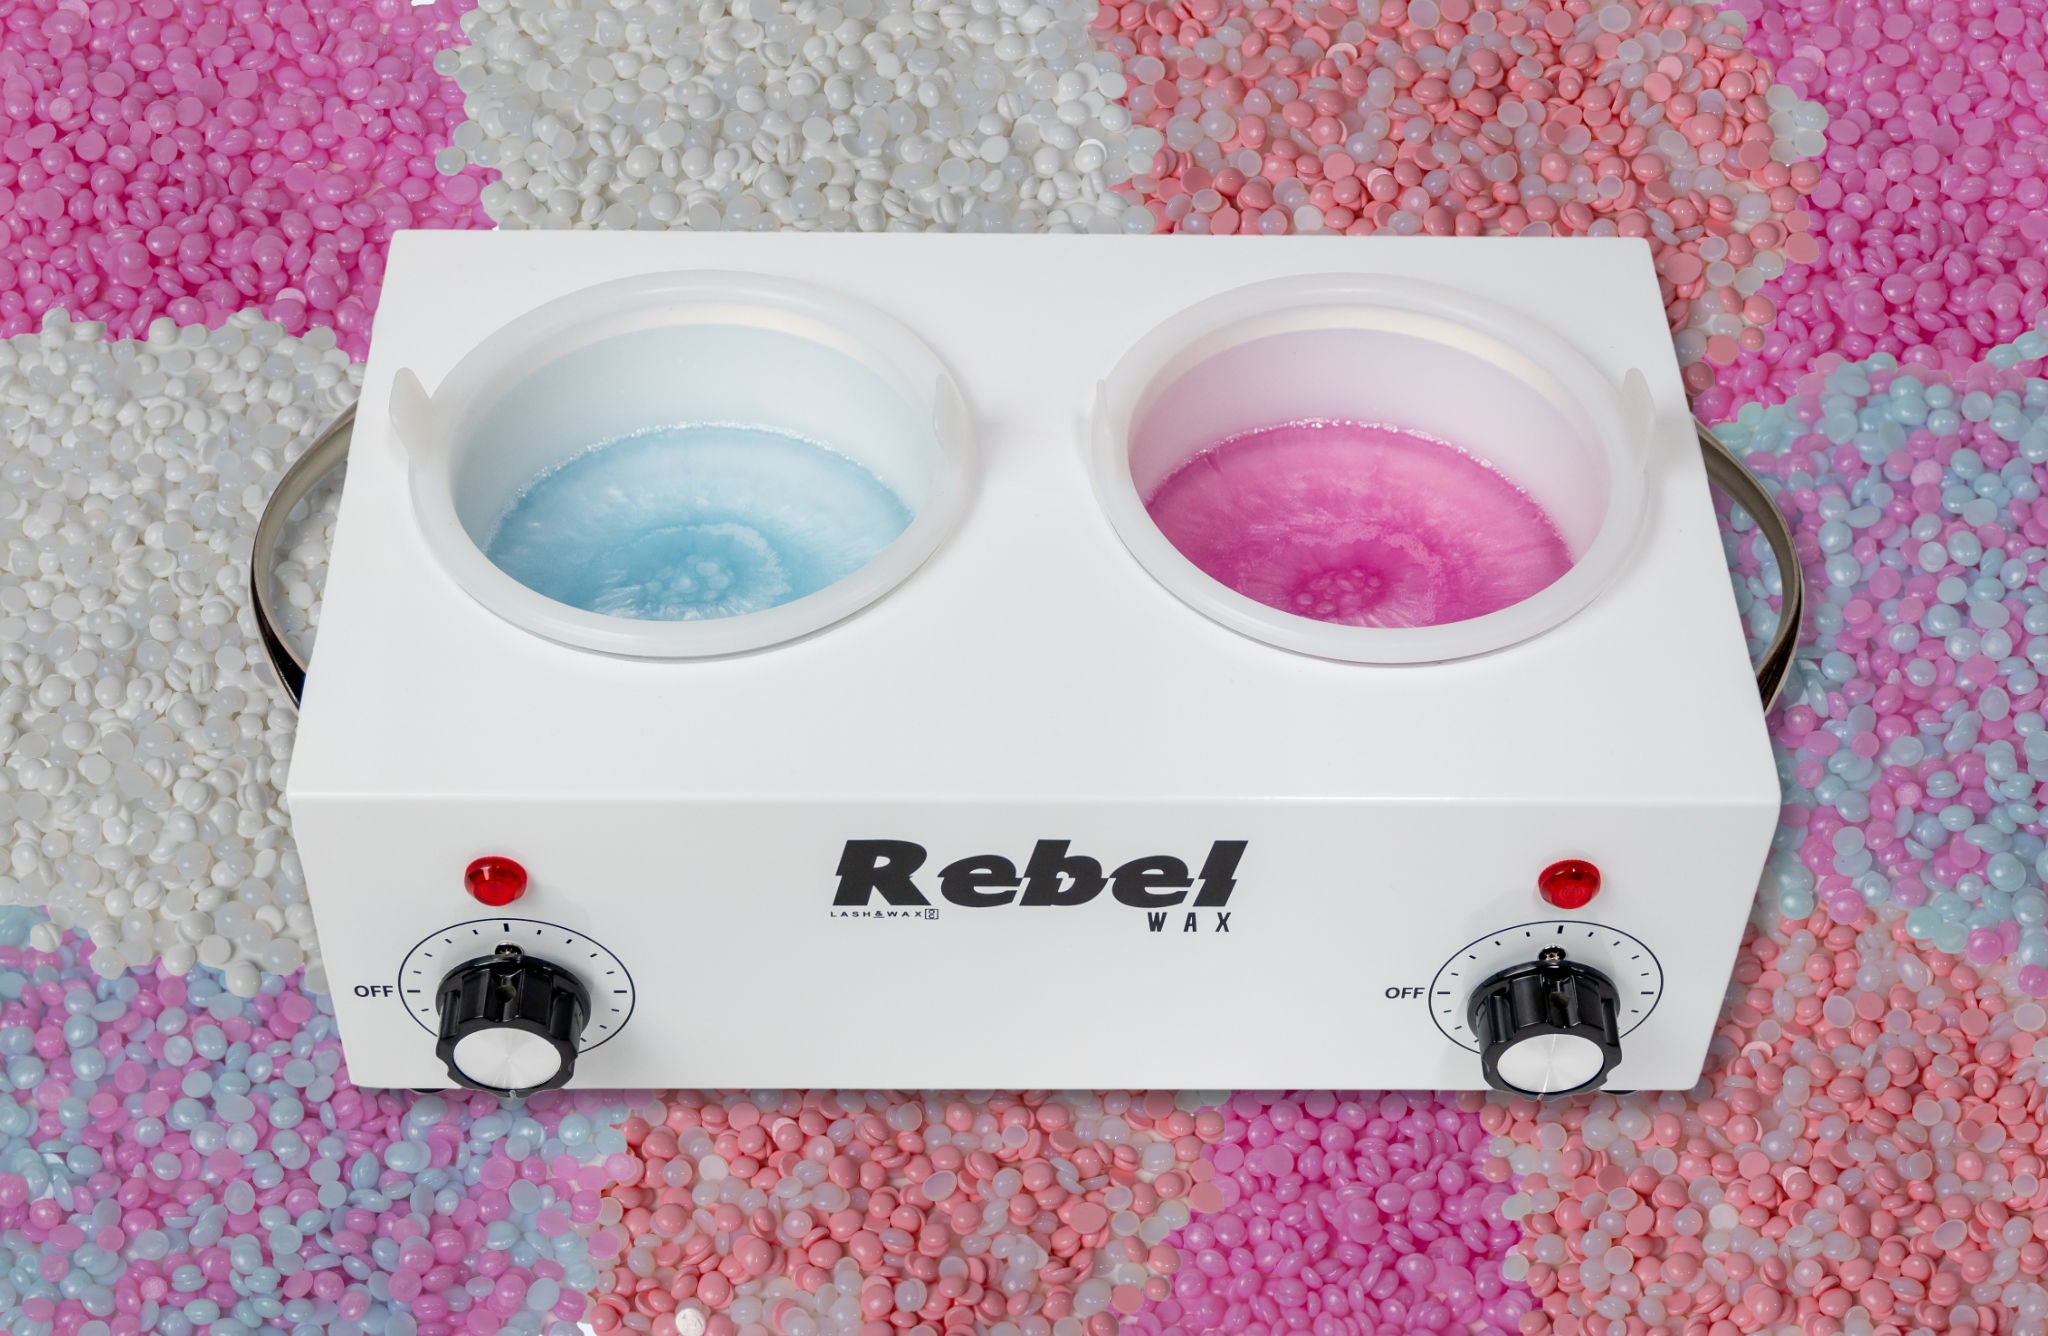 photo of a wax warmer pot for hair removal with light blue melted wax in one pot and melted hot pink colored wax in the other.